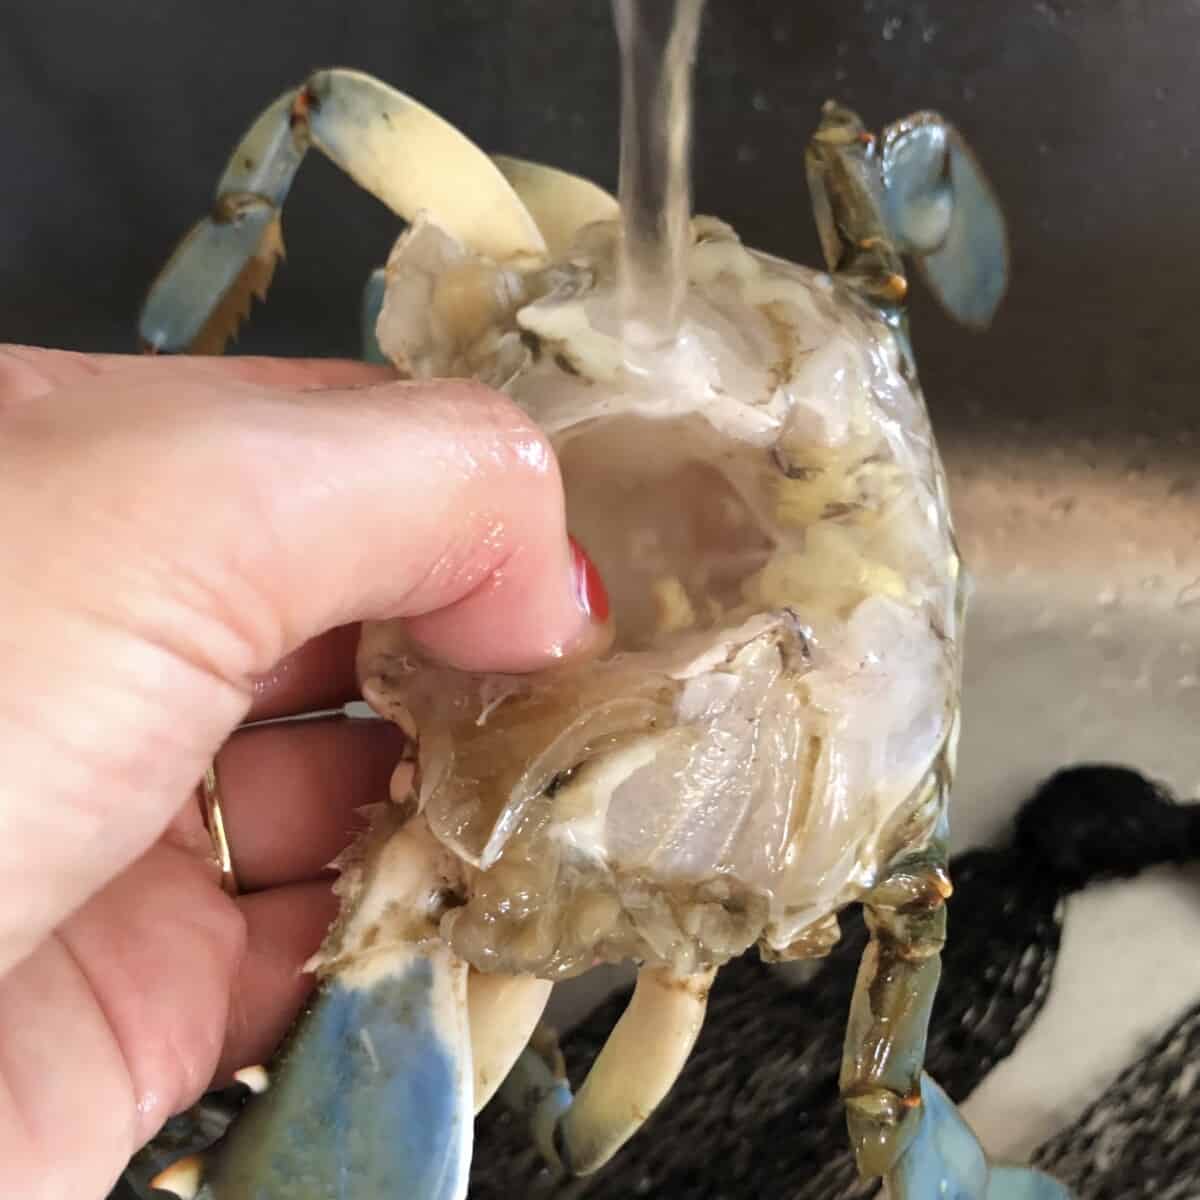 Running water over the inside of a raw crab to clean it after removing the gills, liver, and pancreas.